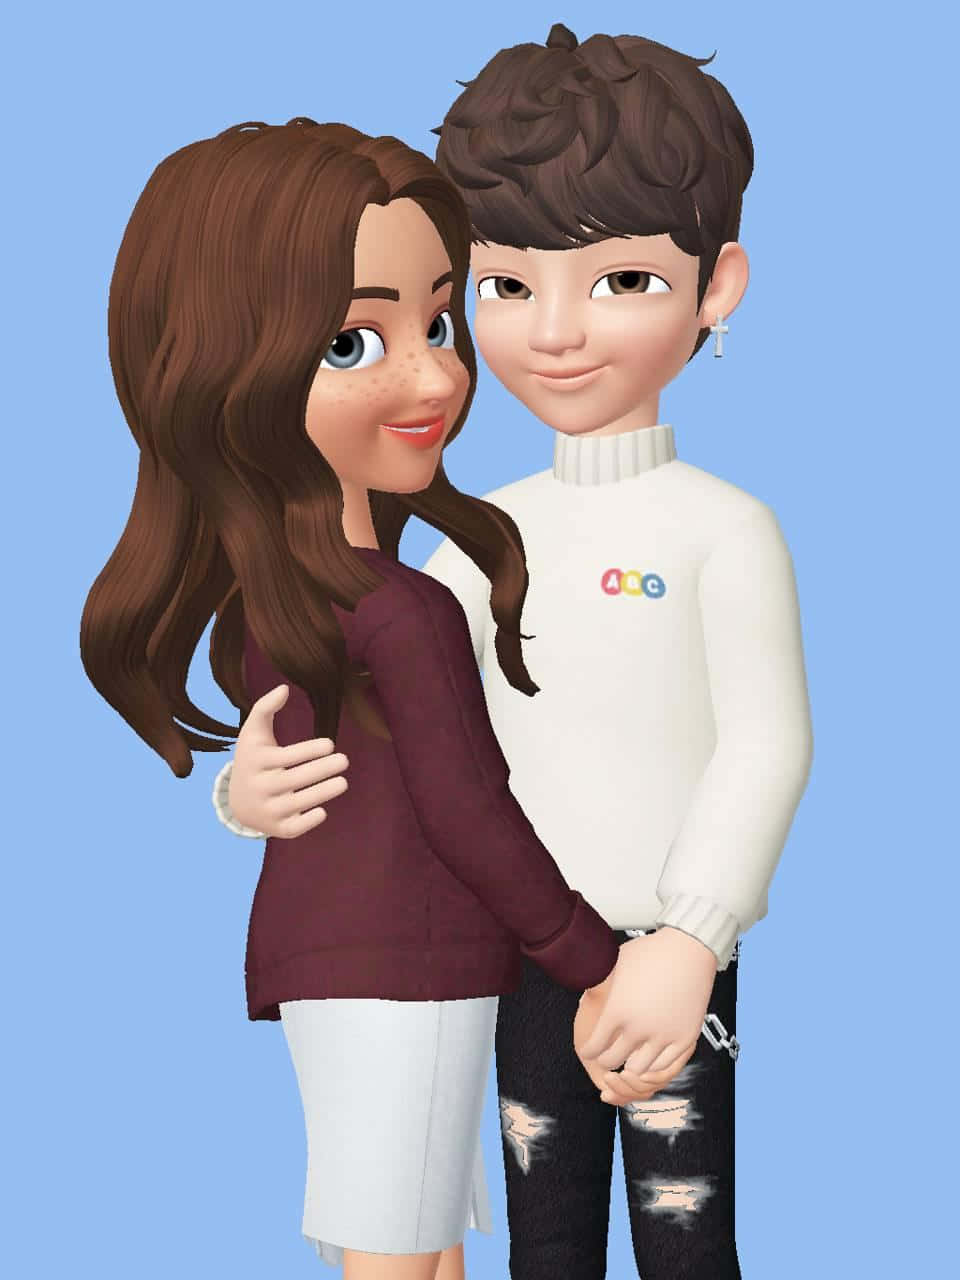 Friends united in a Zepeto world